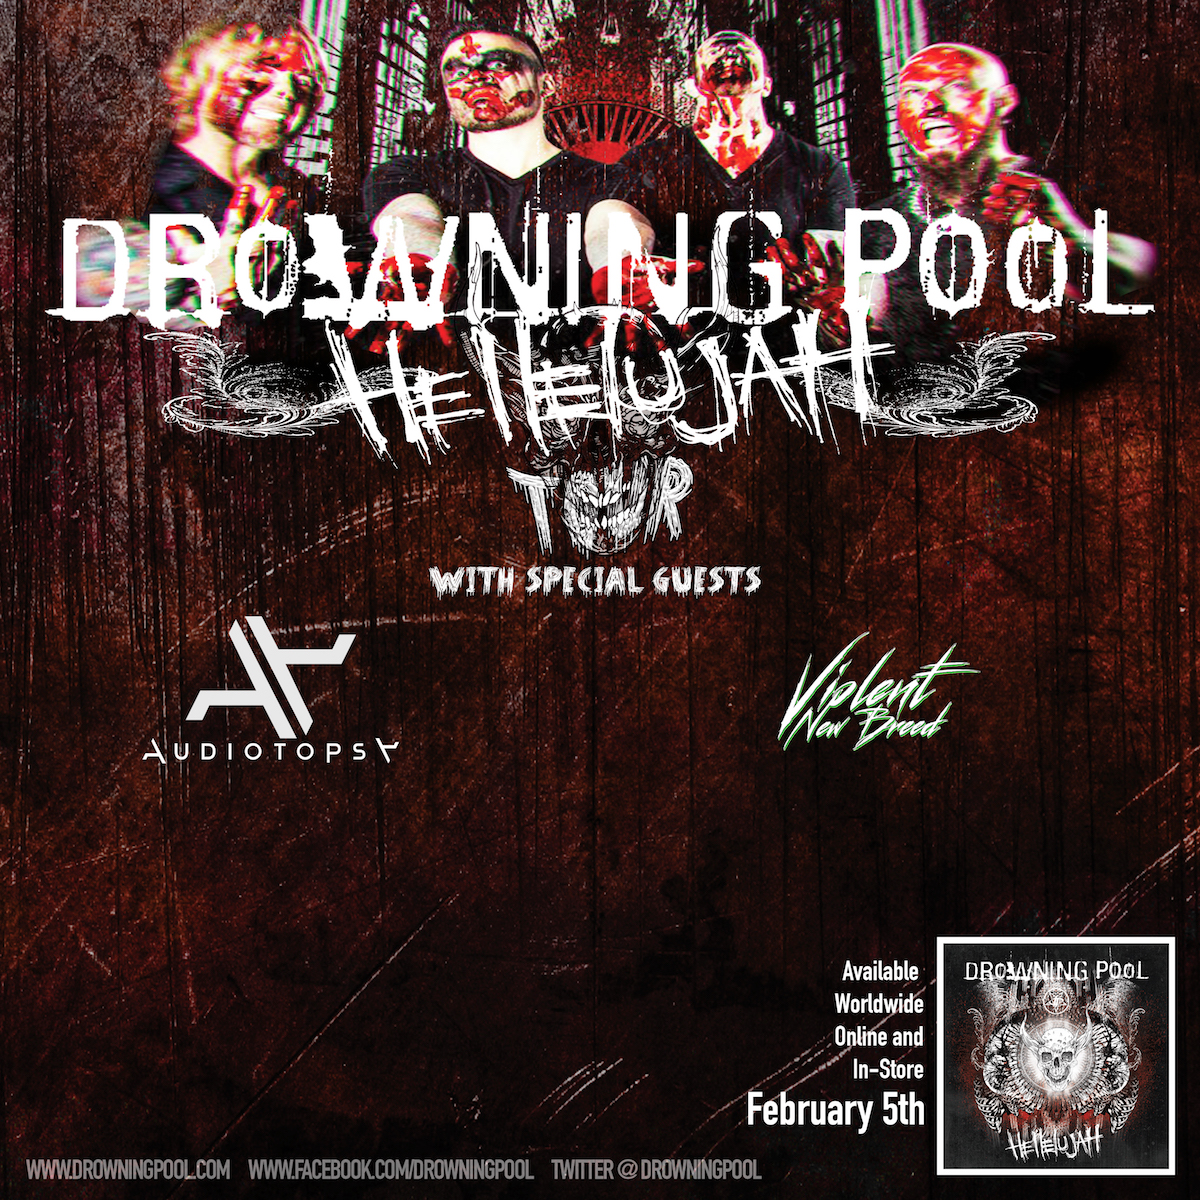 DROWNING POOL ANNOUNCE NEW TOUR DATES